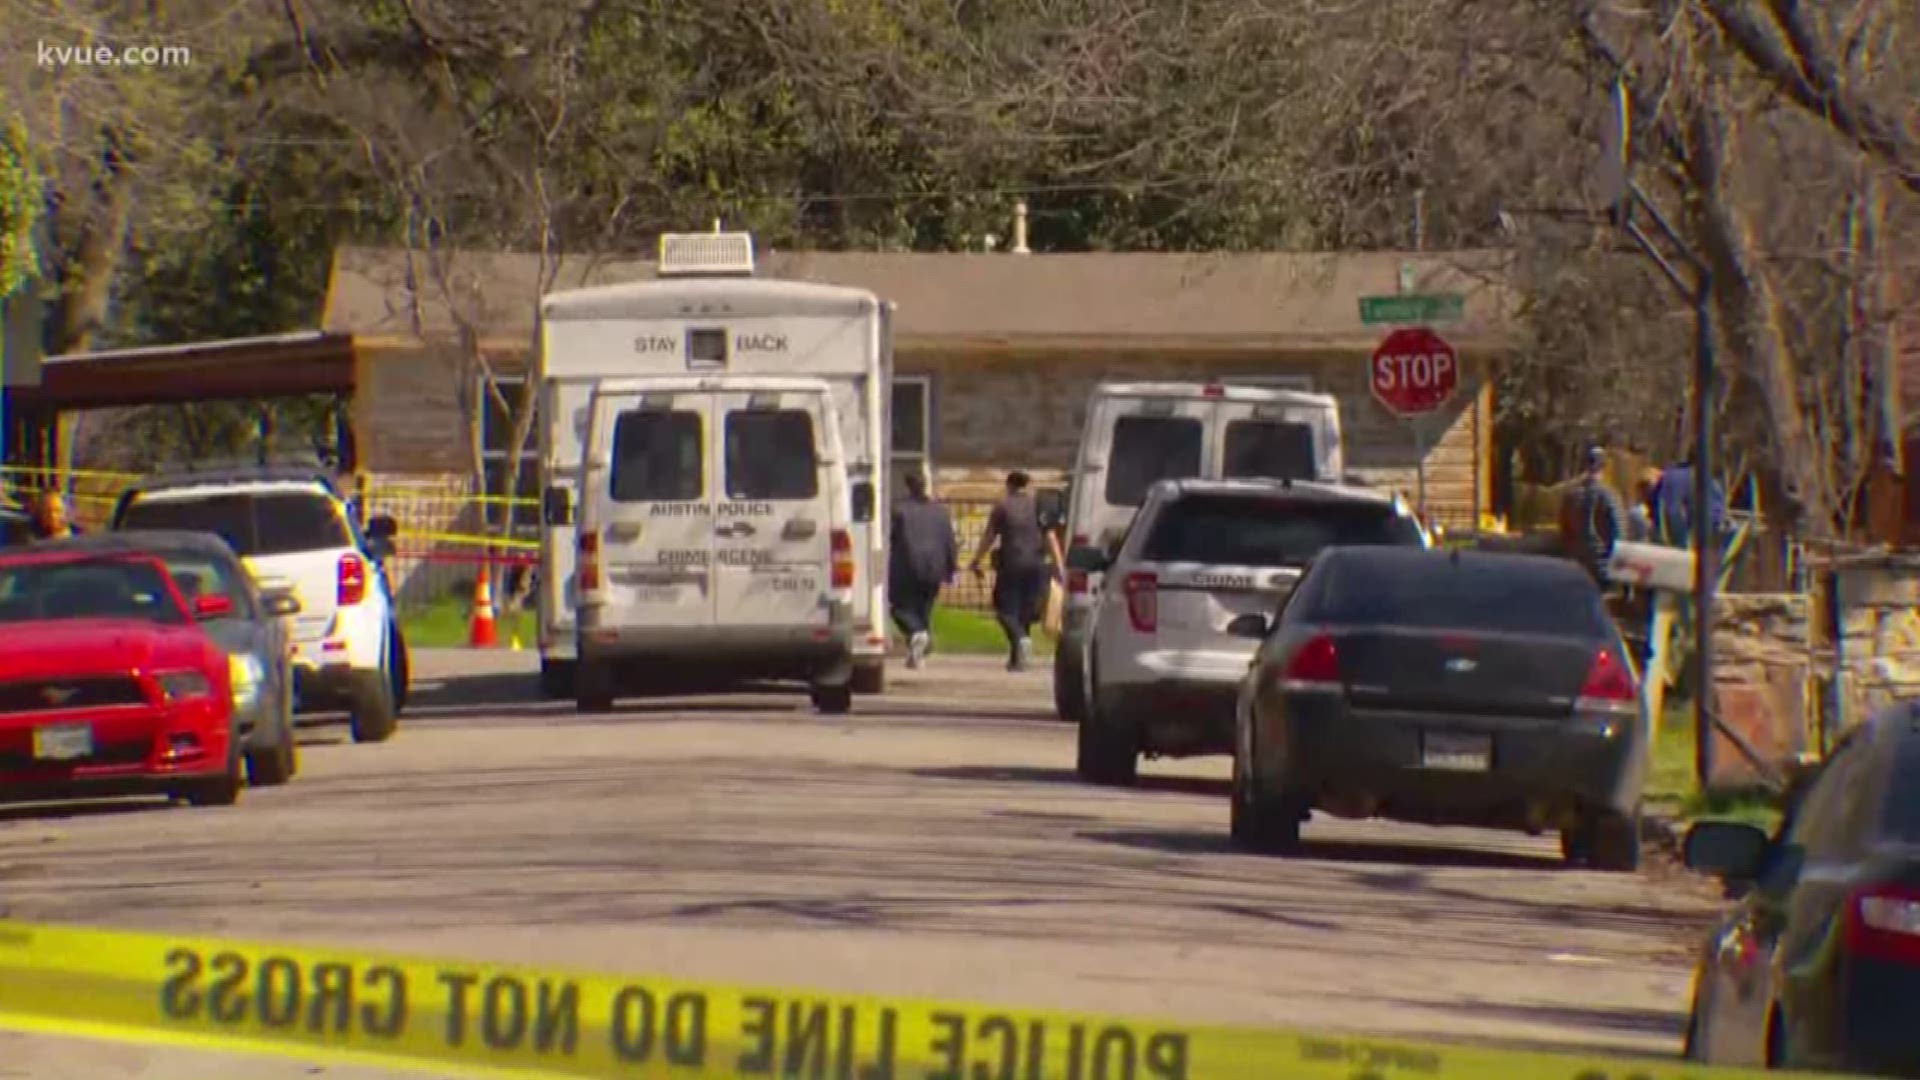 An Austin man who allegedly ran at police officers with a 'pick-axe' is dead.